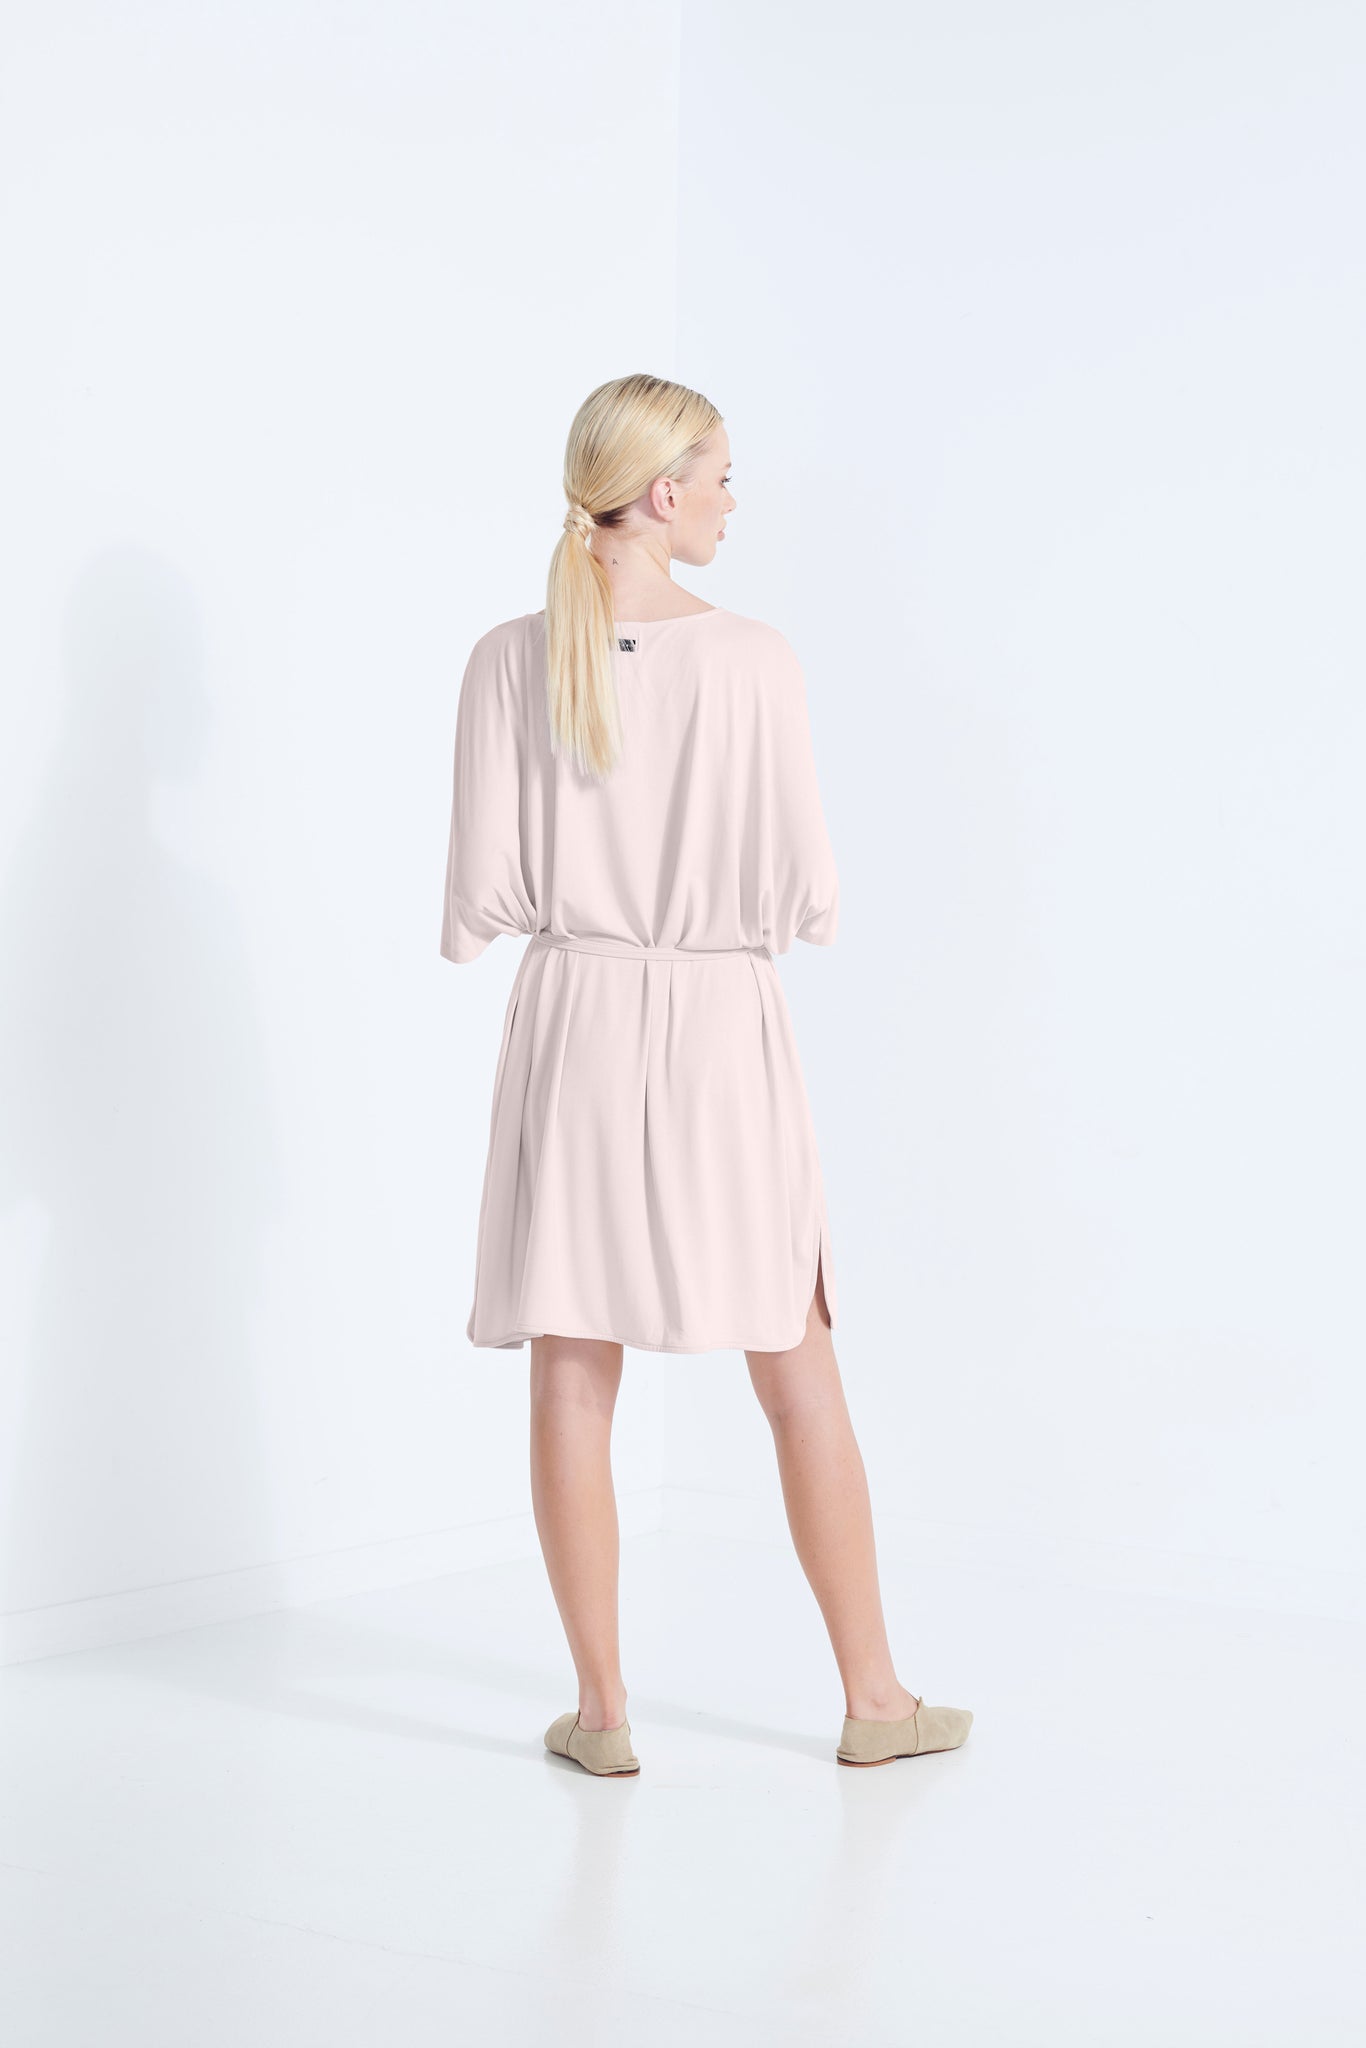 THEMIS DRESS LONGLINE T-SHIRT BEECHWOOD MODAL STRETCH WITH REMOVABLE TIE PIPISHELL WASHED PALE PINK  BACK VIEW